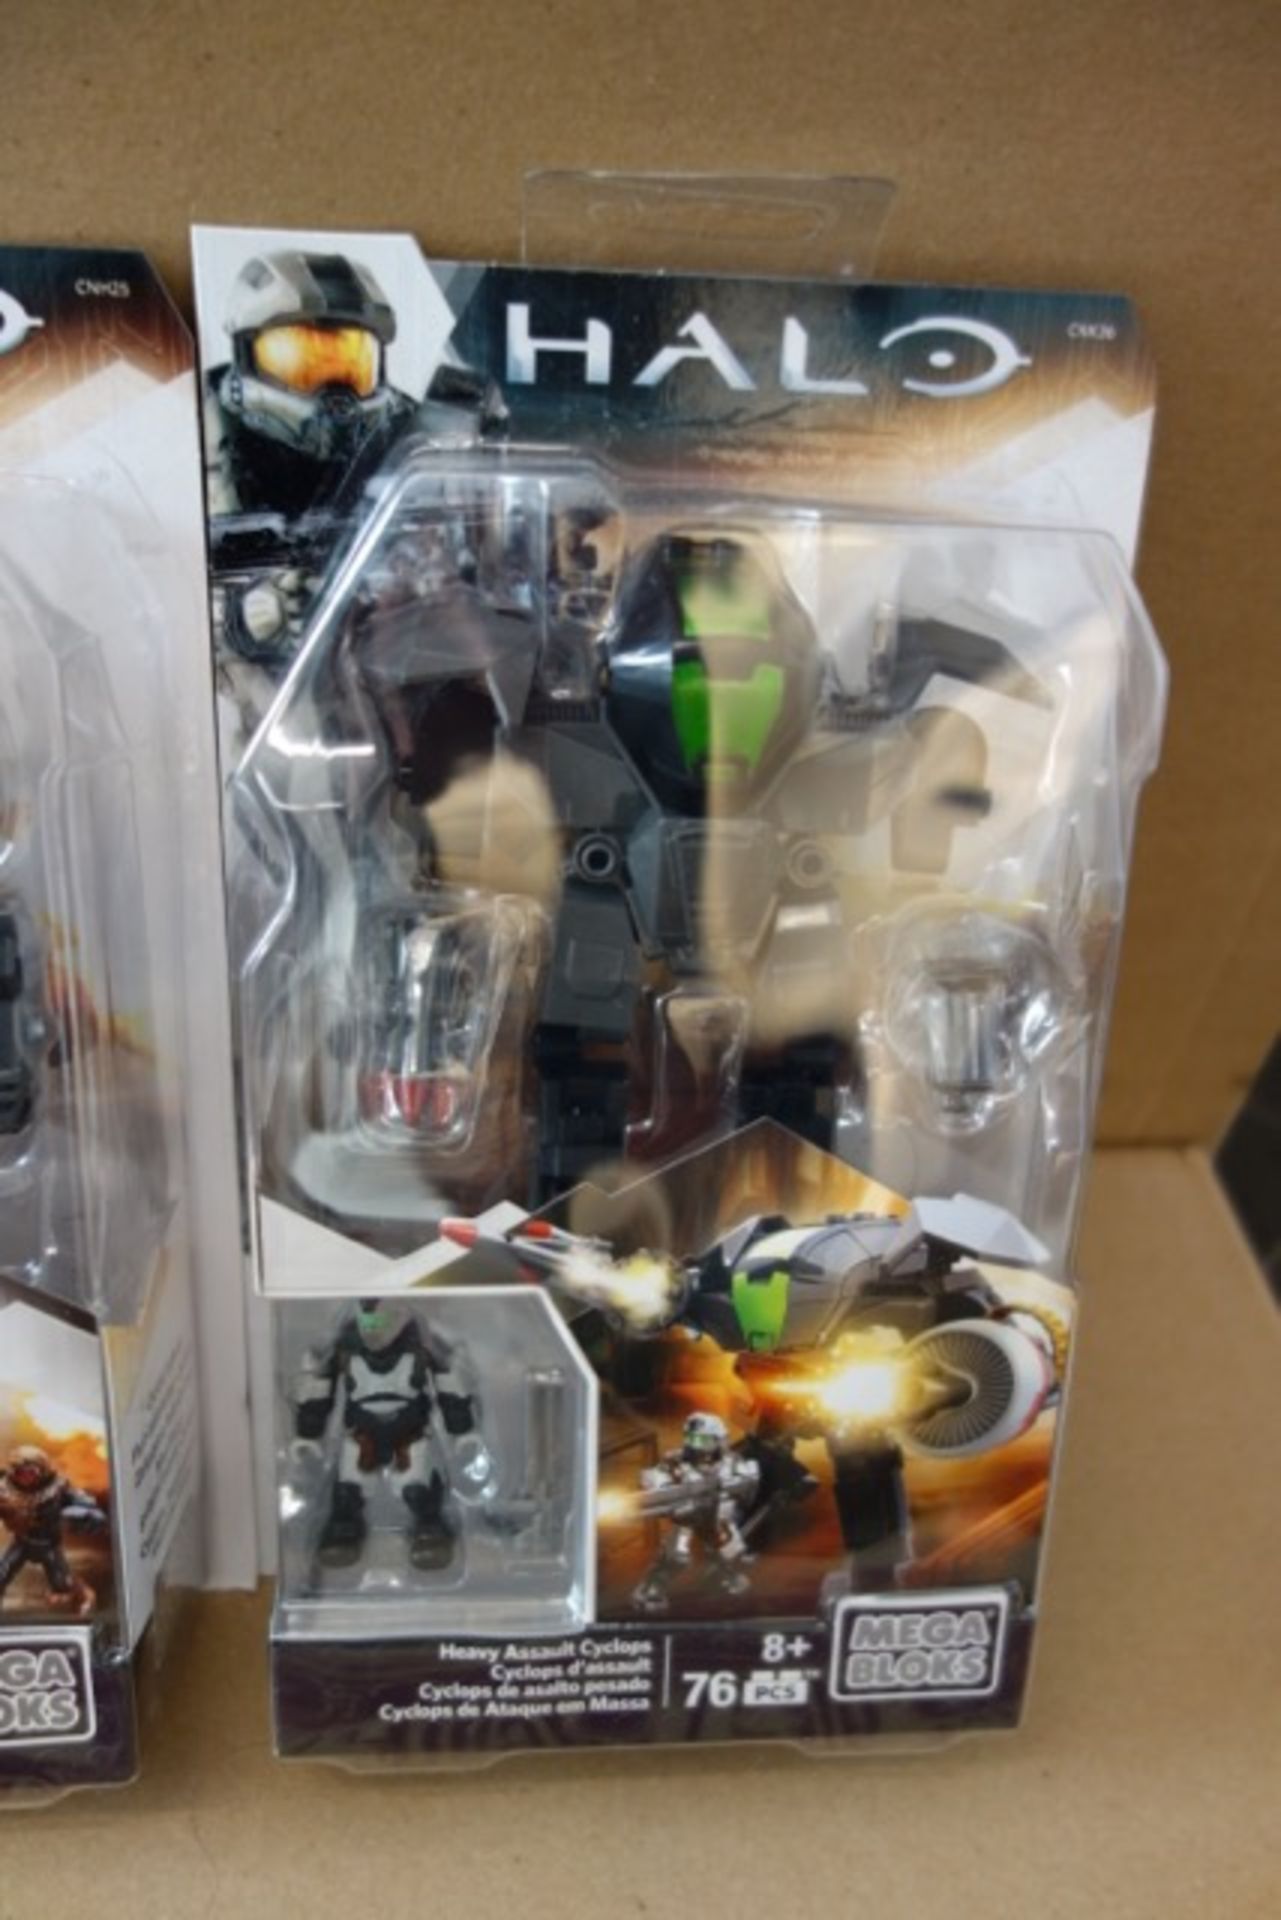 20 x Brand New Mega Bloks Halo Cyclops - Includes a mix of: Damage control cyclops, Flood infected - Image 4 of 7